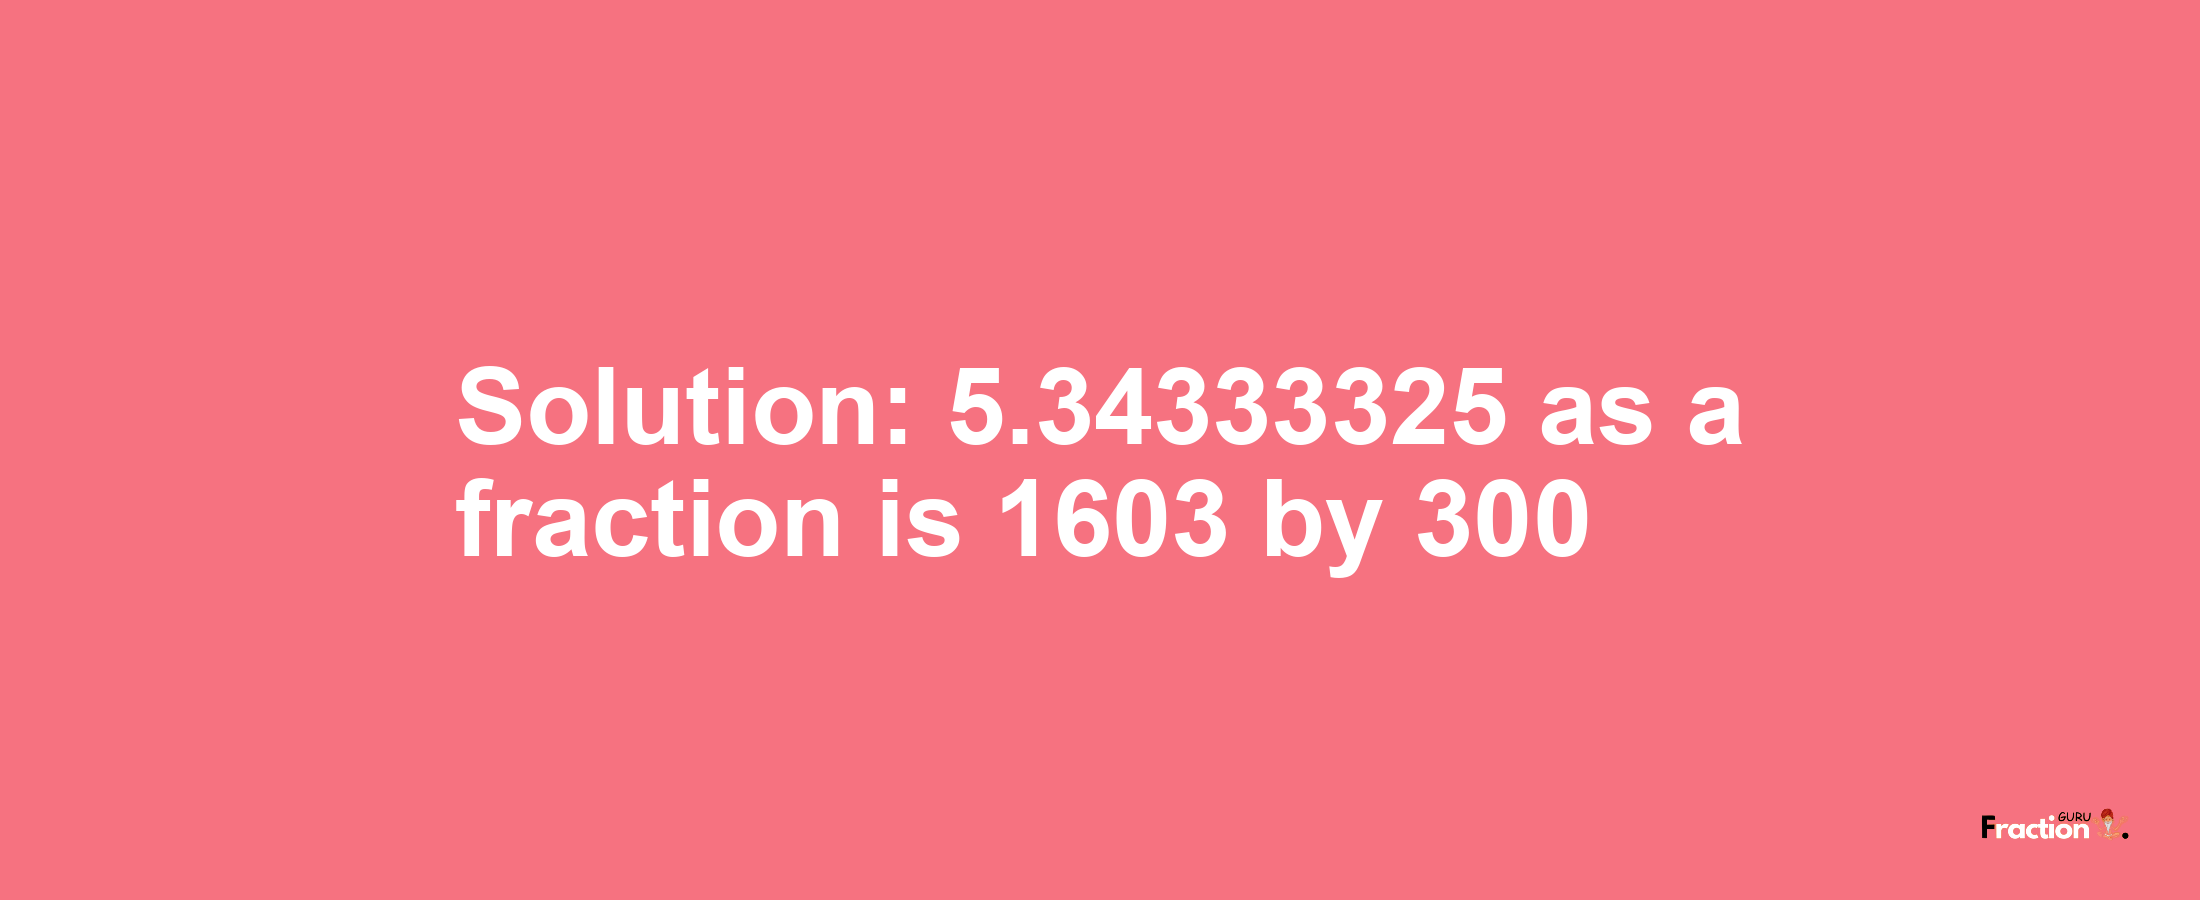 Solution:5.34333325 as a fraction is 1603/300